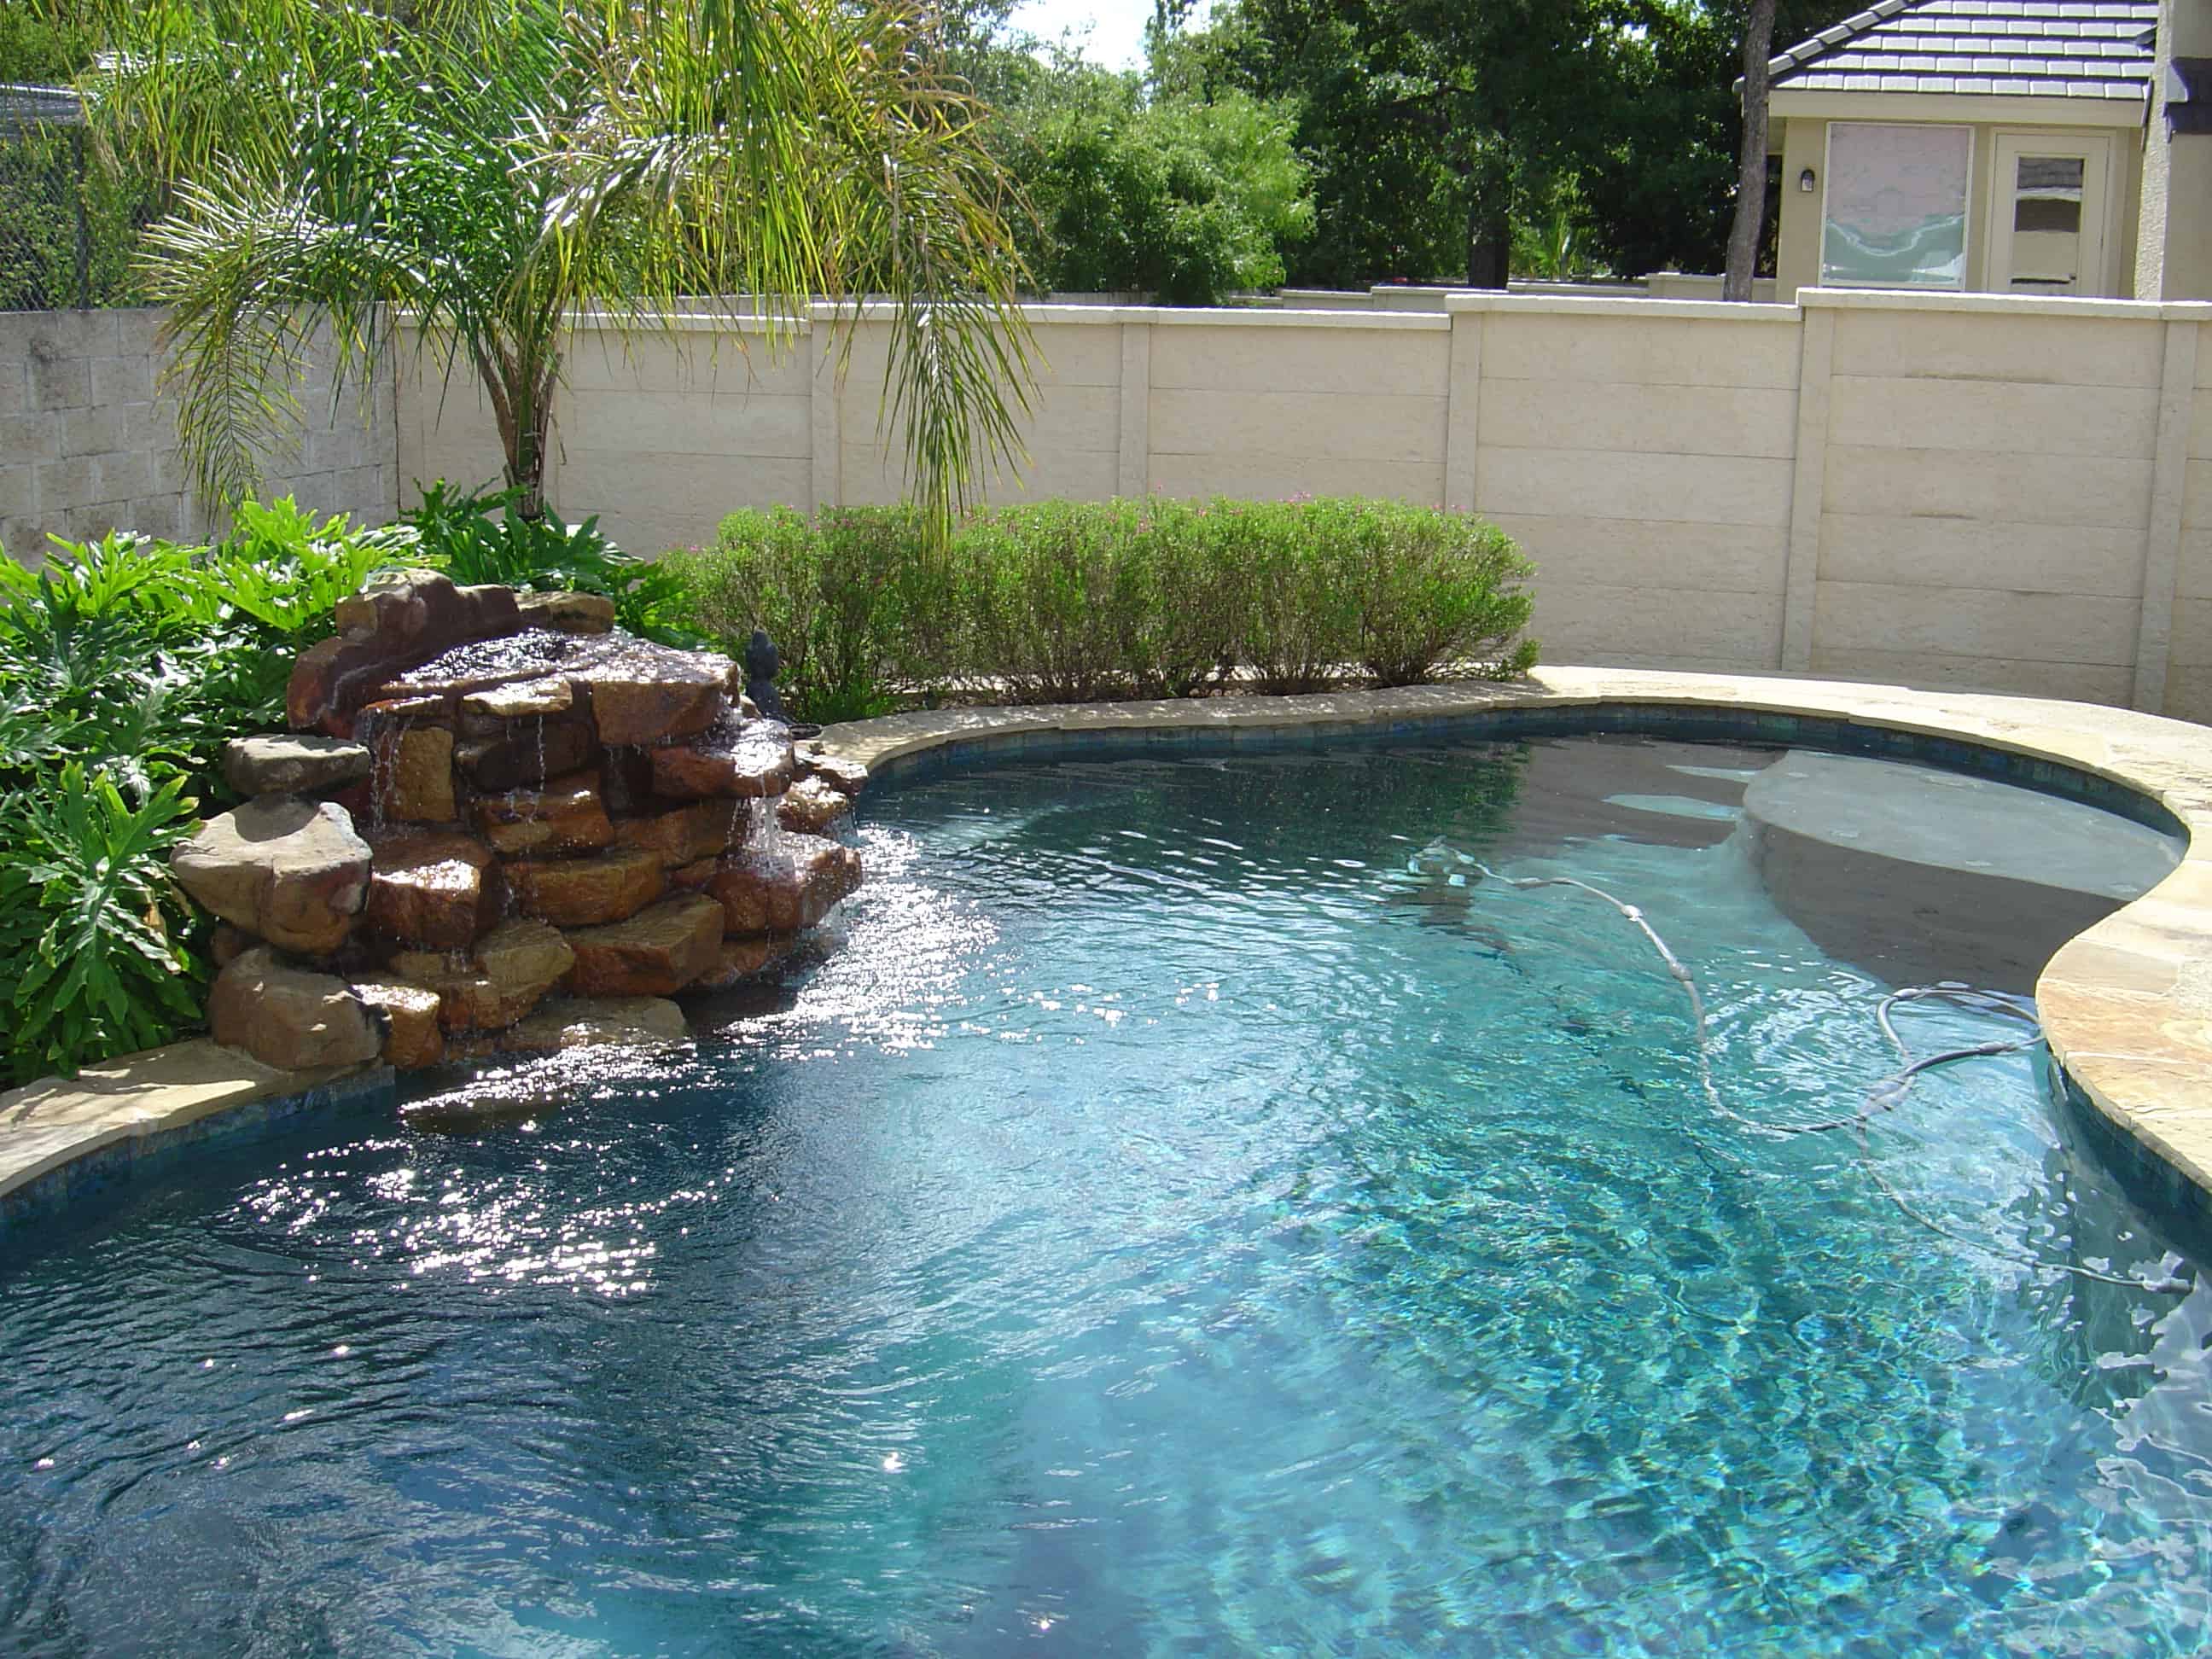 Plants are an excellent addition to add to your pool area as they bring beauty as well as a vacation feel